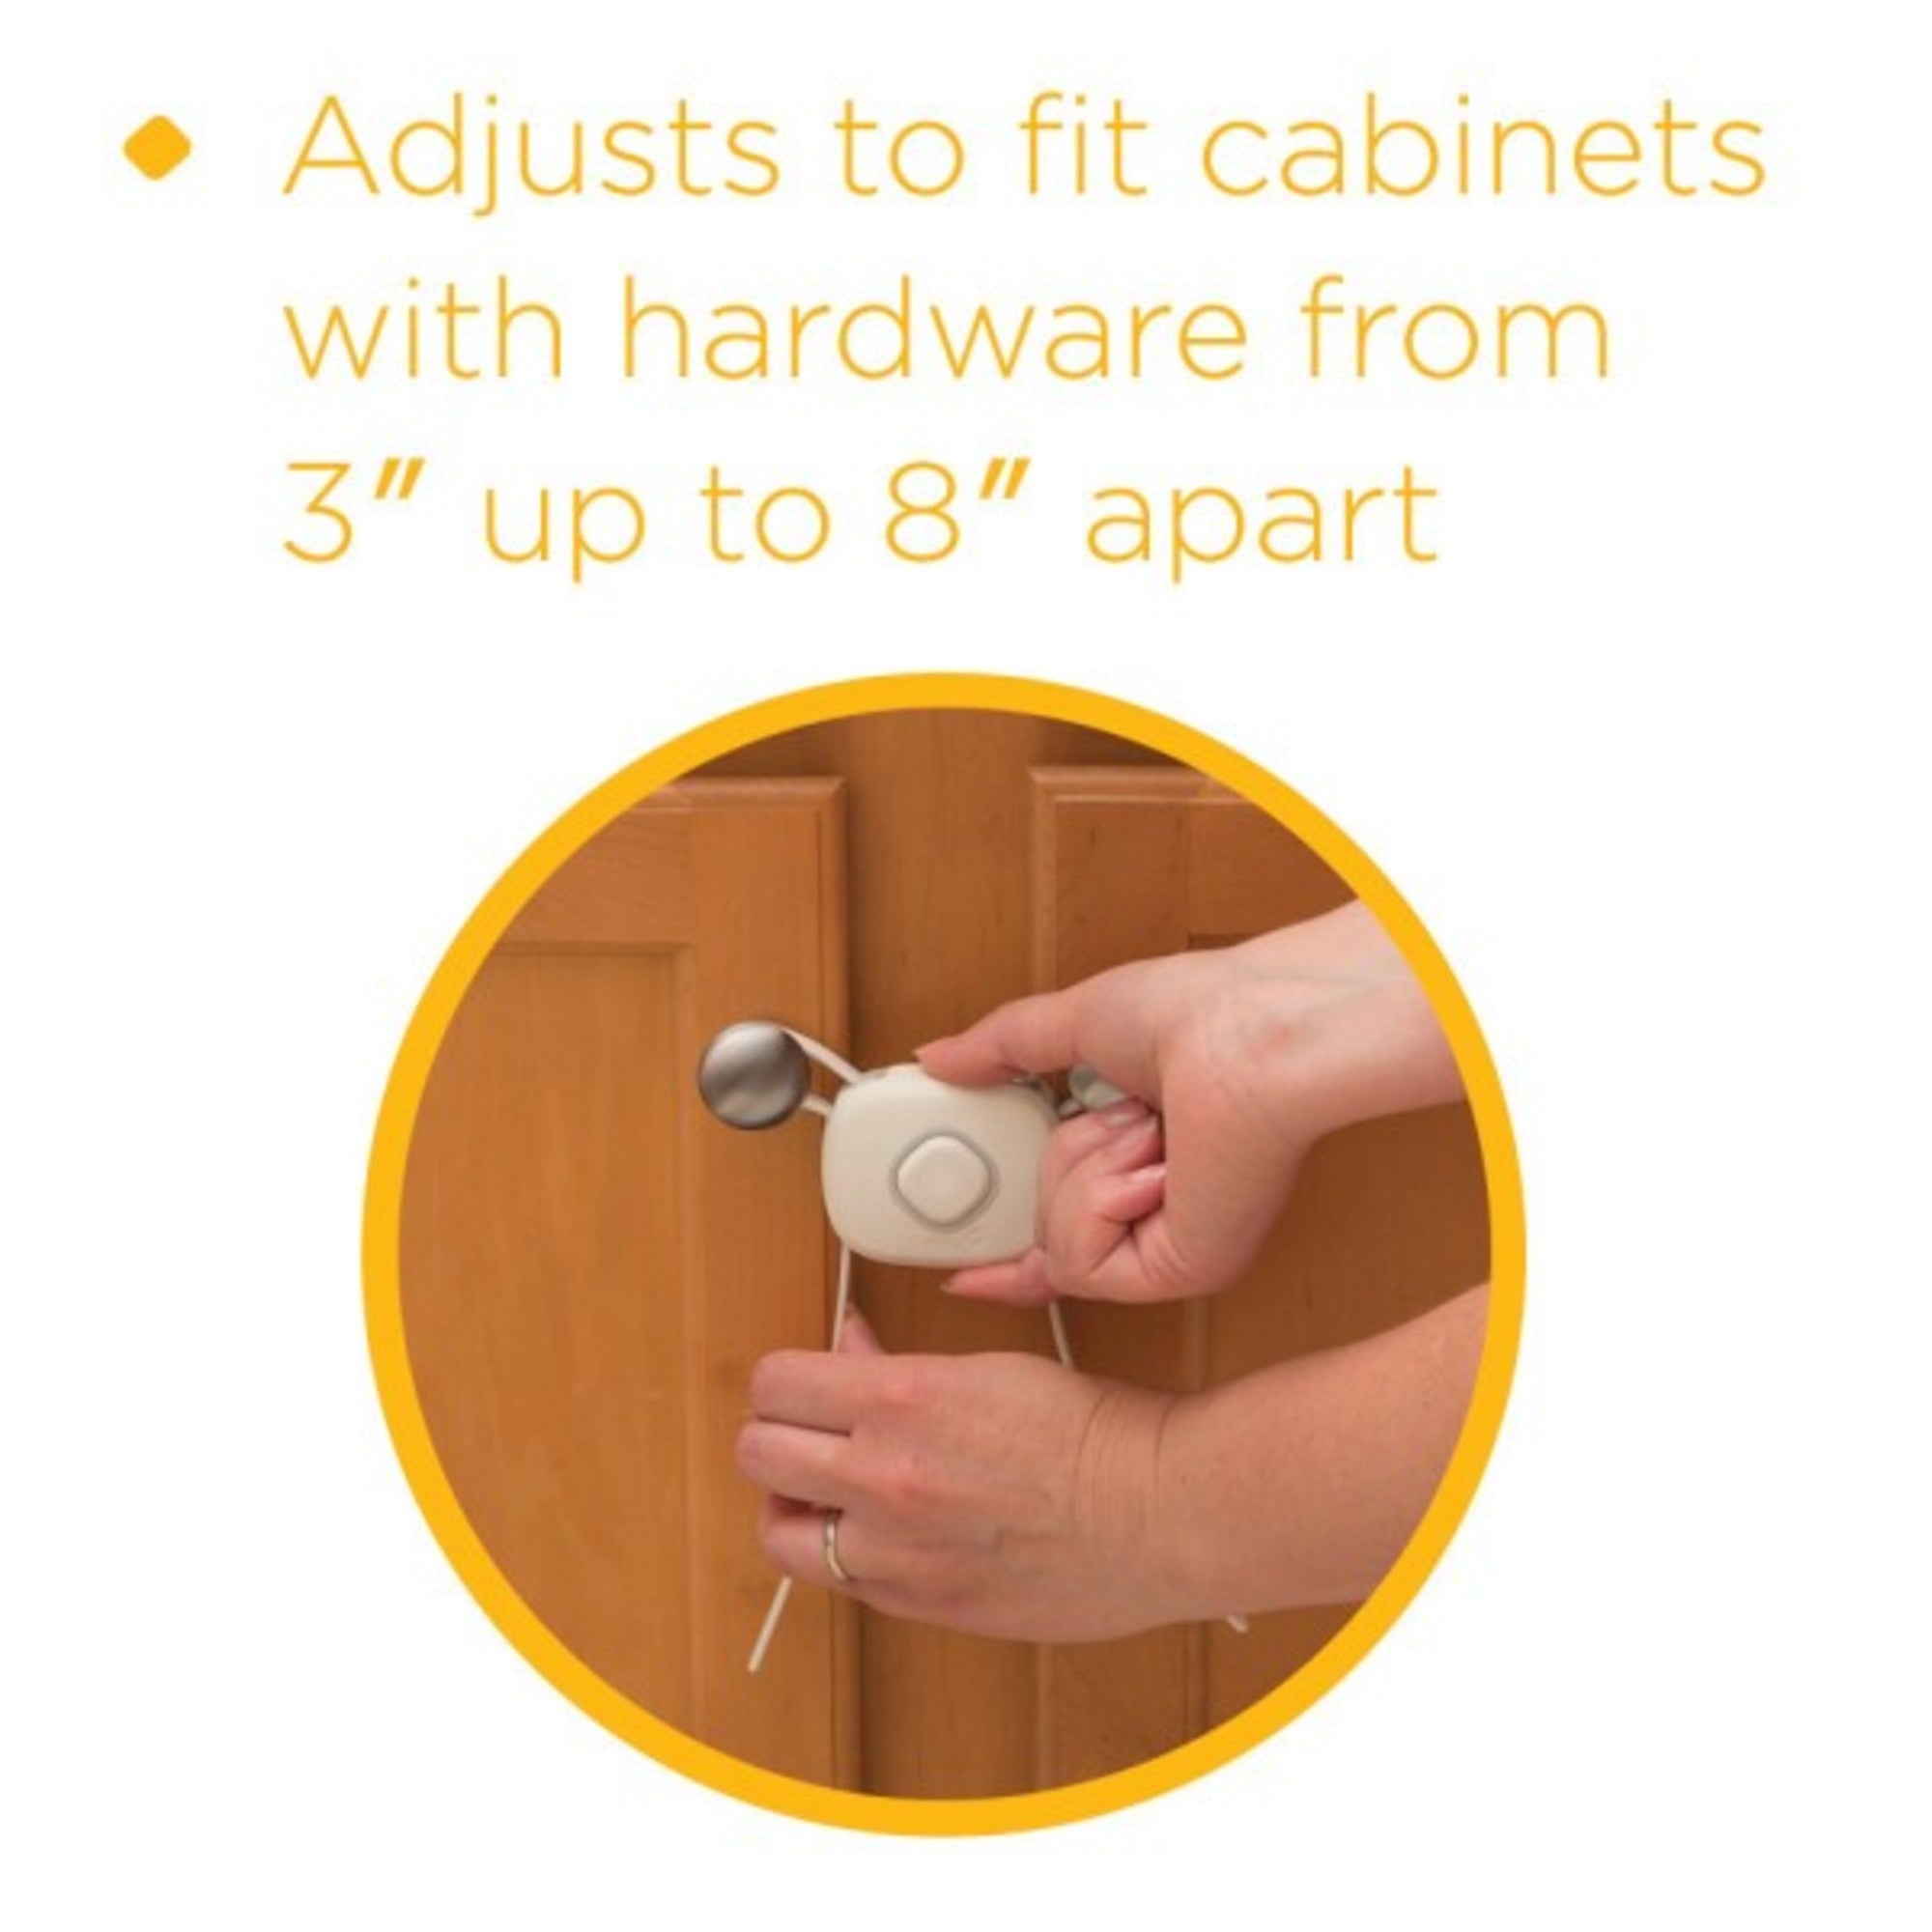 Adjust to fit cabinets with hardware from 3 inches to 8 inches apart